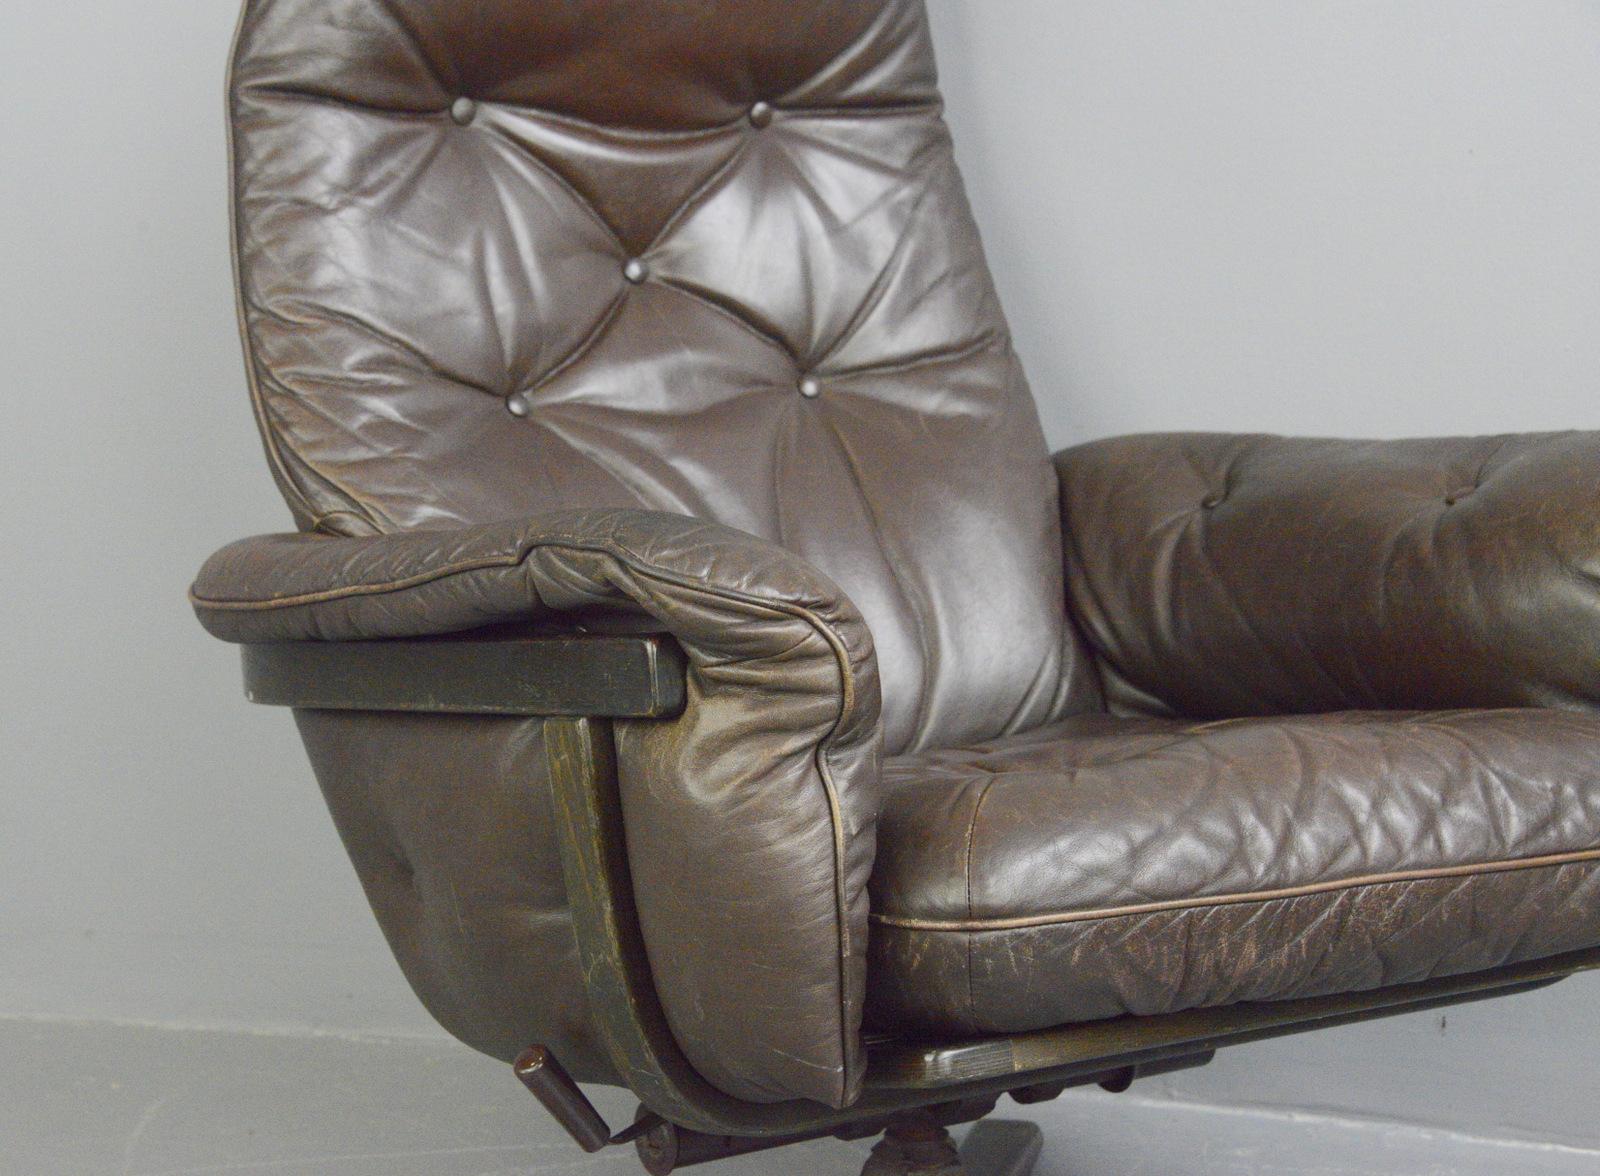 Leather lounge chair by G Mobel, circa 1960s

- Chocolate brown leather
- Button back
- Swivels and reclines
- Bentwood frame
- Produced by G Mobel
- Swedish, 1960s
- Measures: 85cm wide x 80cm deep x 102cm tall
- 44cm seat